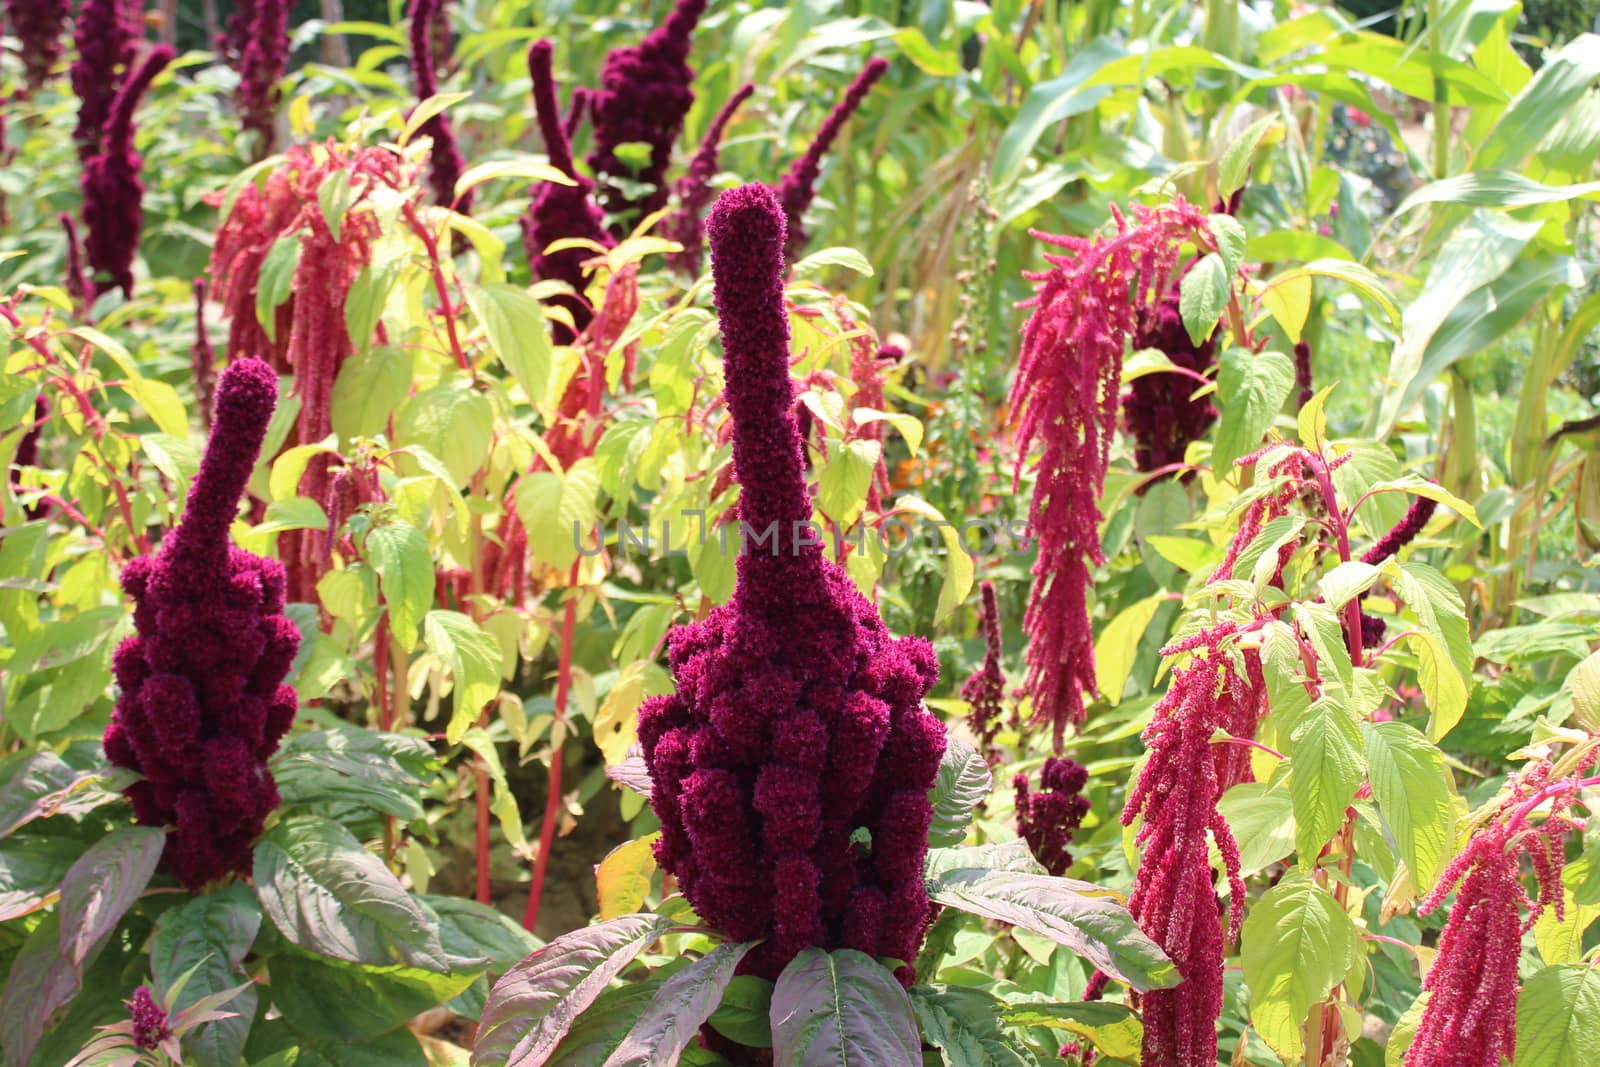 The picture shows a field of amaranth.